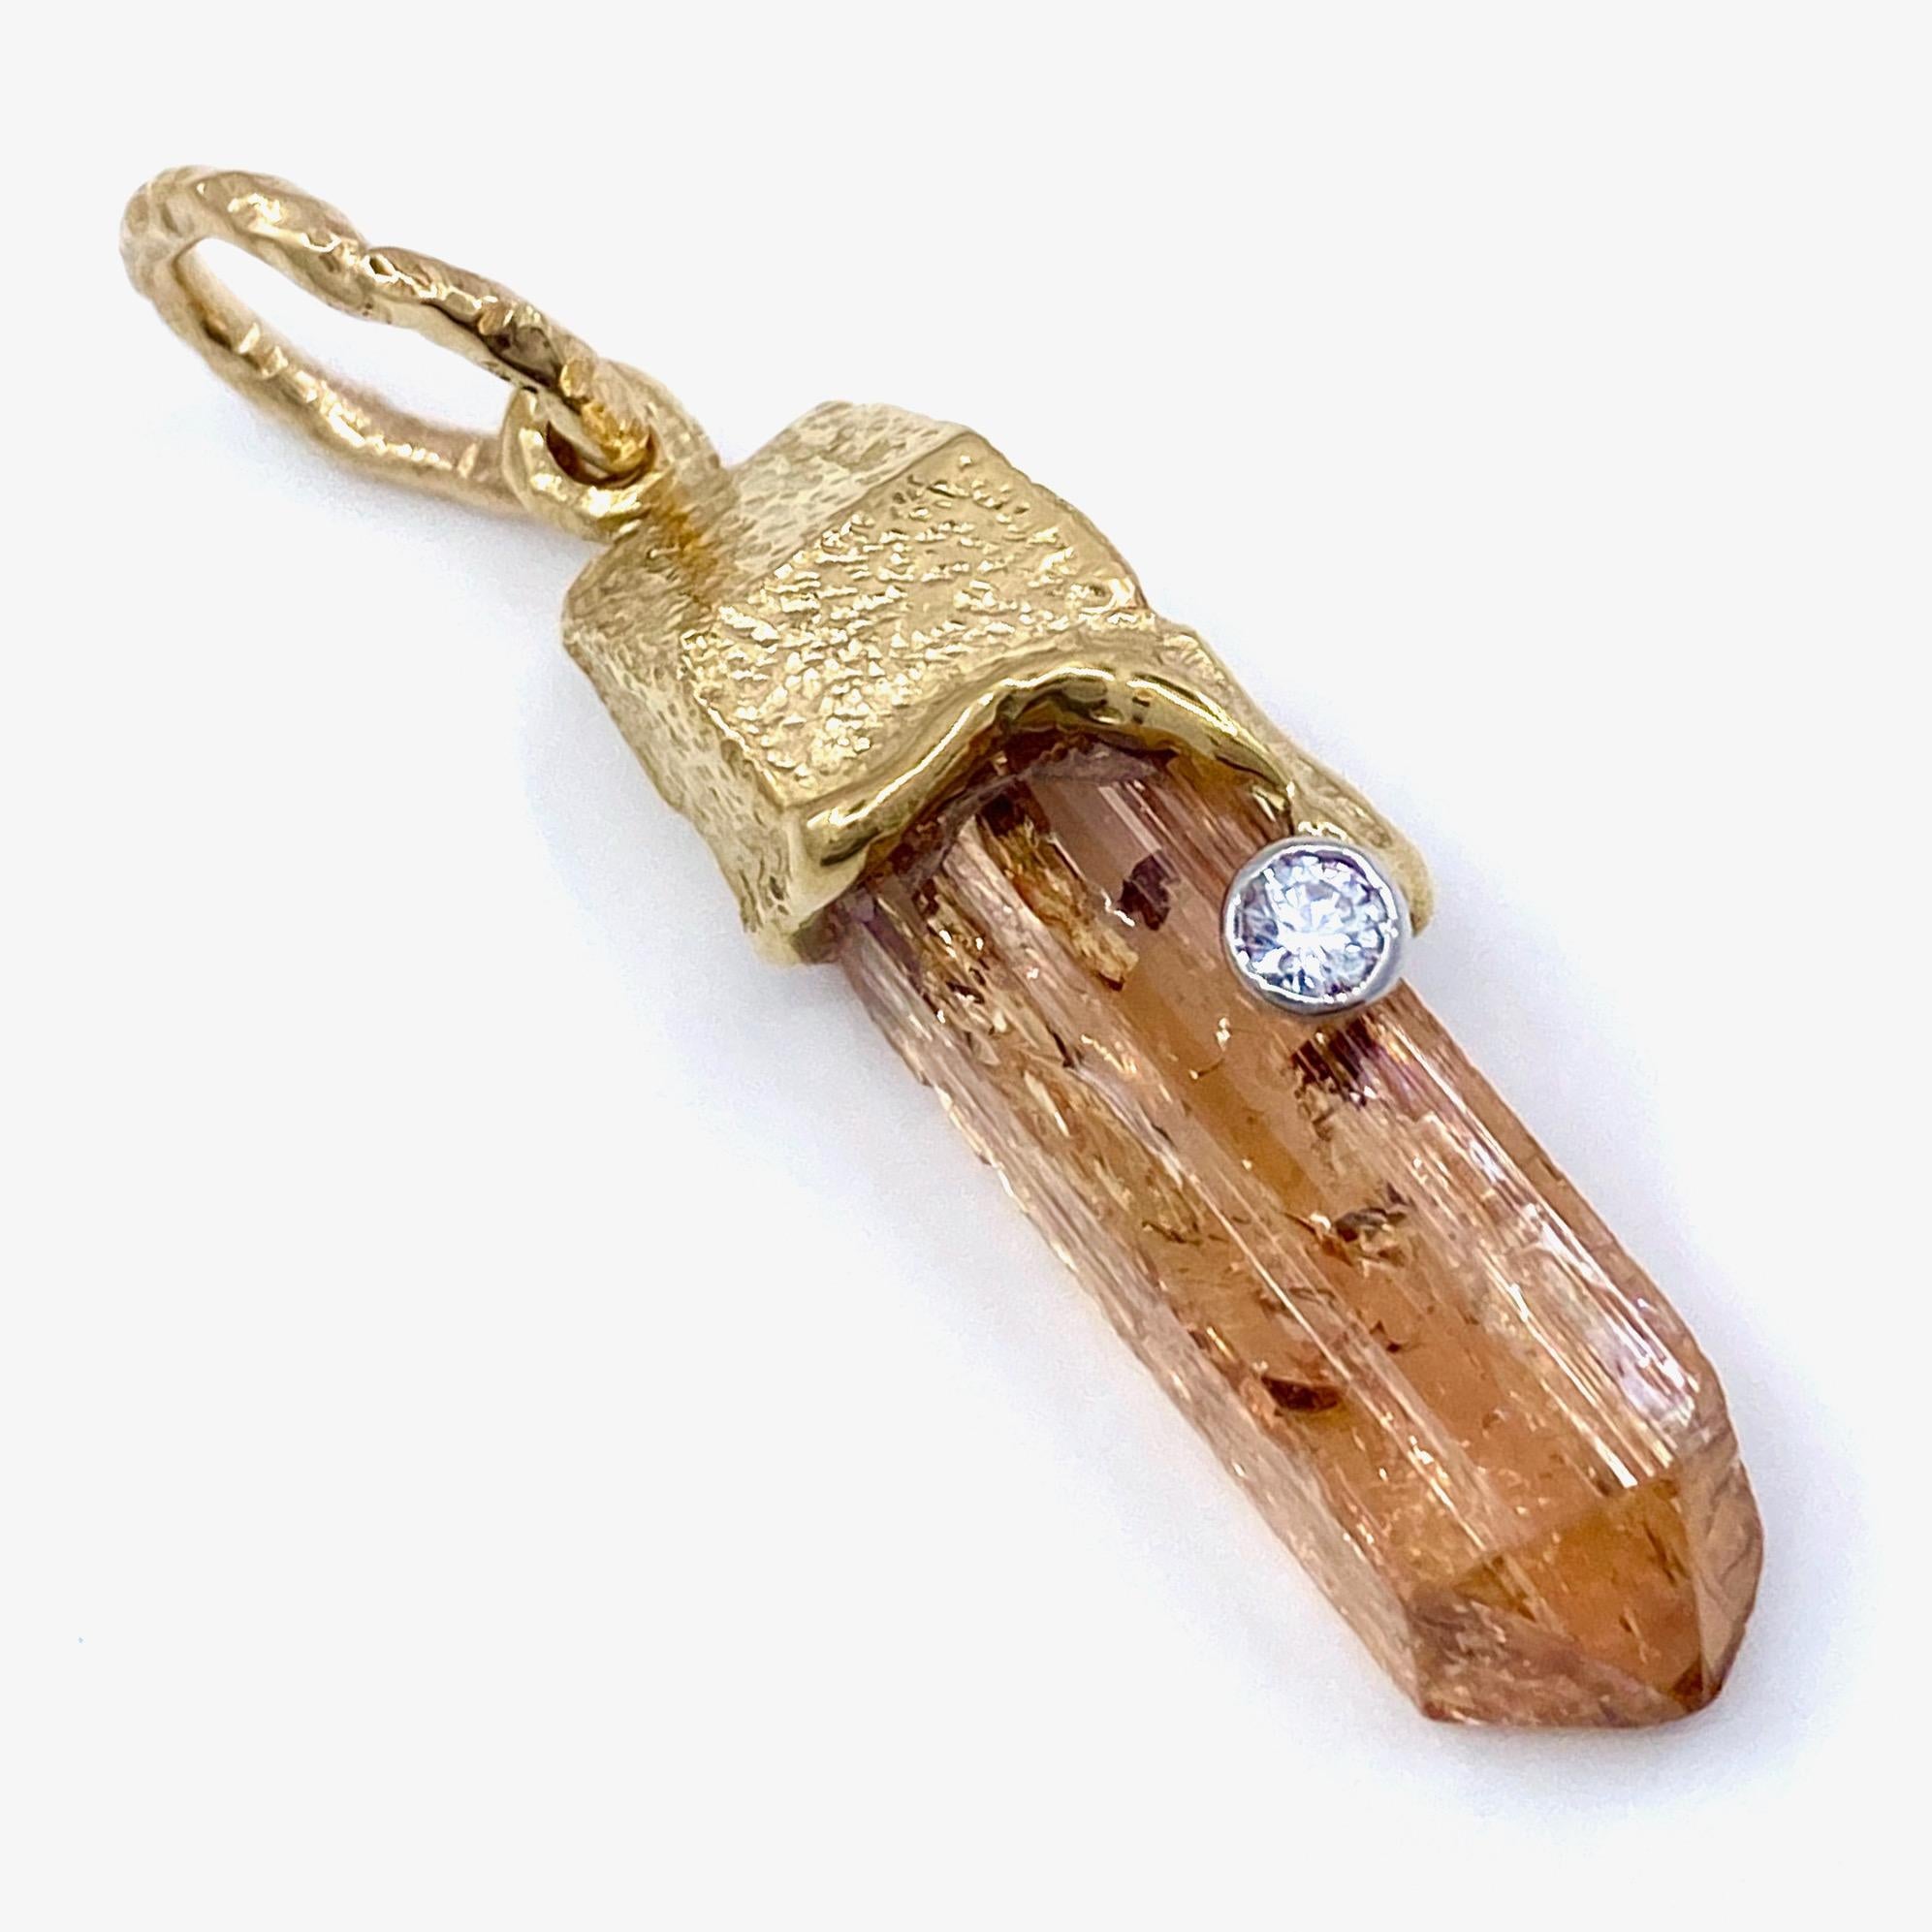 Eytan Brandes has had this citrine prism for years.  It's a beautiful crystal, filled with all kinds of natural inclusions, bubbles and fracture lines.  Because it has so many flaws, this citrine never had a shot at being a cut gem, but its